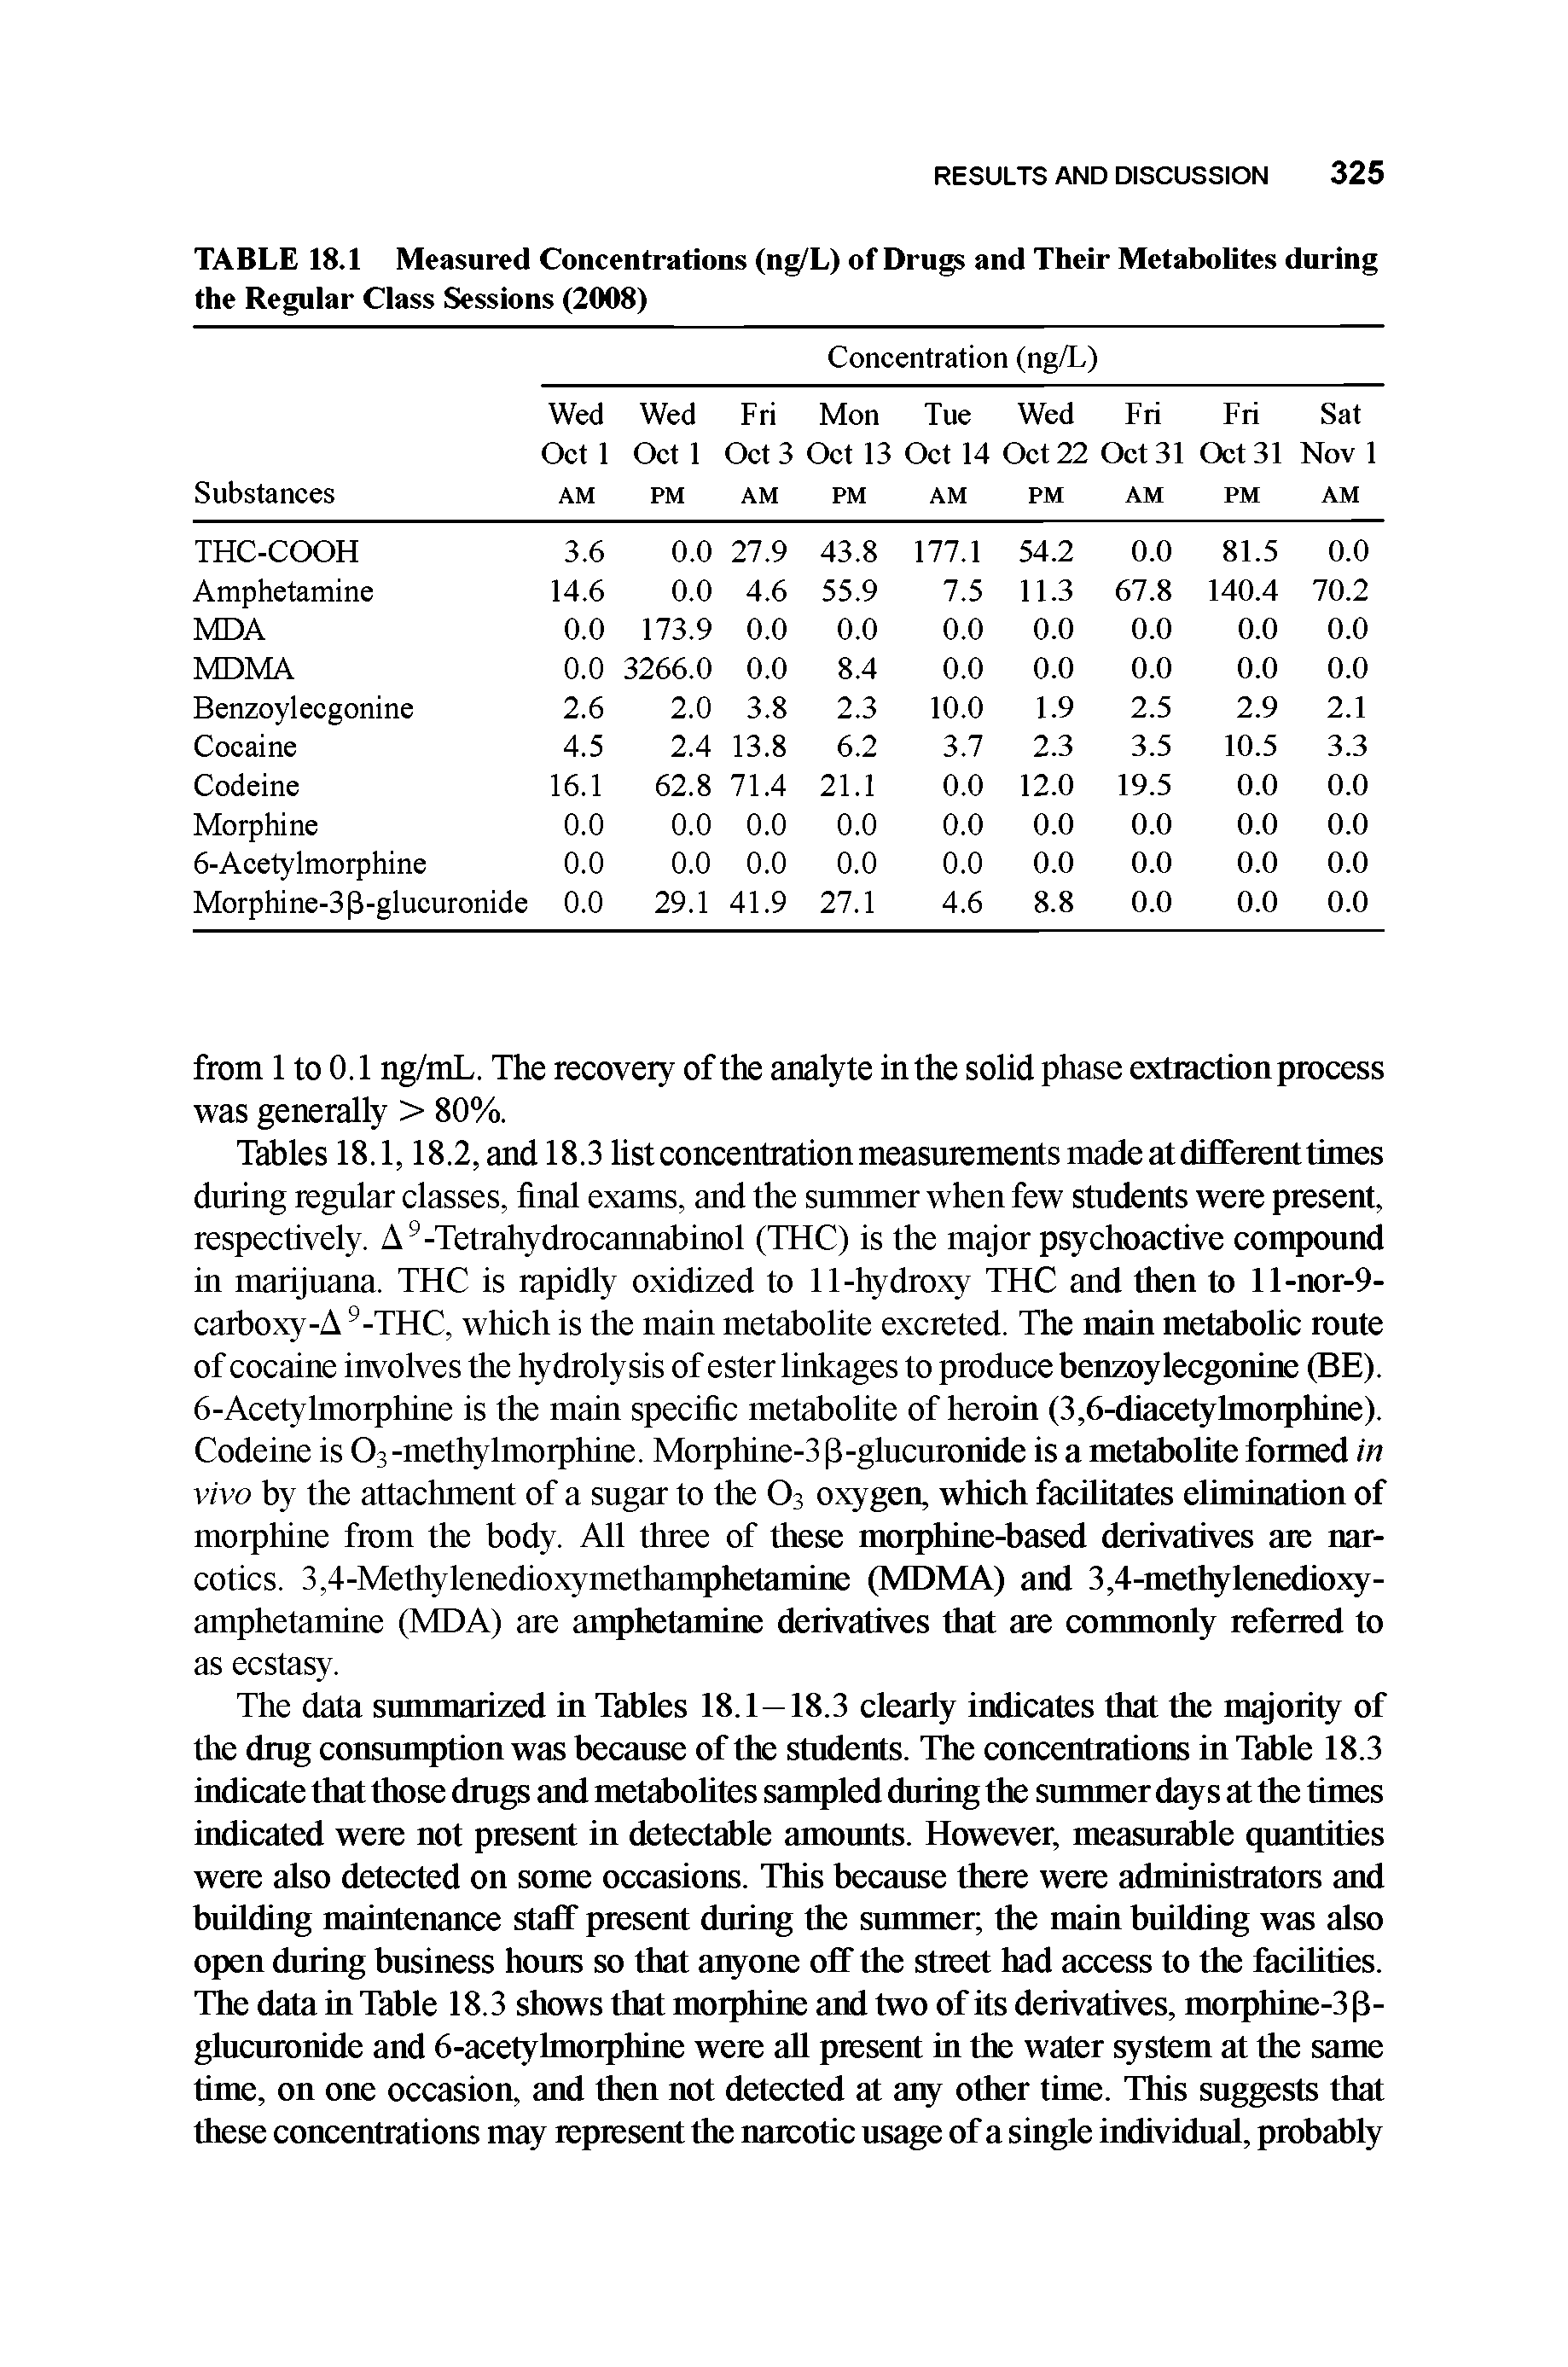 Tables 18.1,18.2, and 18.3 hst concentration measurements madeatdiEferenttimes during regular classes, final exams, and the summer when few students were present, respectively. A -Tetrahydrocannabinol (THC) is the major psychoactive compound in marijuana. THC is rapidly oxidized to 11-hydroxy THC and then to ll-nor-9-carboxy-A -THC, which is the main metabolite excreted. The main metabolic route of cocaine involves the hydrolysis of ester linkages to produce benzoylecgonine (BE). 6-Acetylmorphine is the main specific metabolite of heroin (3,6-diacetylmorphine). Codeine is O3 -methylmorphine. Morphine-3 p-glucuronide is a metabolite formed in vivo by the attachment of a sngar to the O3 oxygen, which facilitates elimination of morphine from the body. All three of these morphine-based derivatives are narcotics. 3,4-Methylenedioxymethamphetamine (MDMA) and 3,4-metltylenedioxy-amphetamine (MDA) are amphetamine derivatives that are commonly referred to as ecstasy.